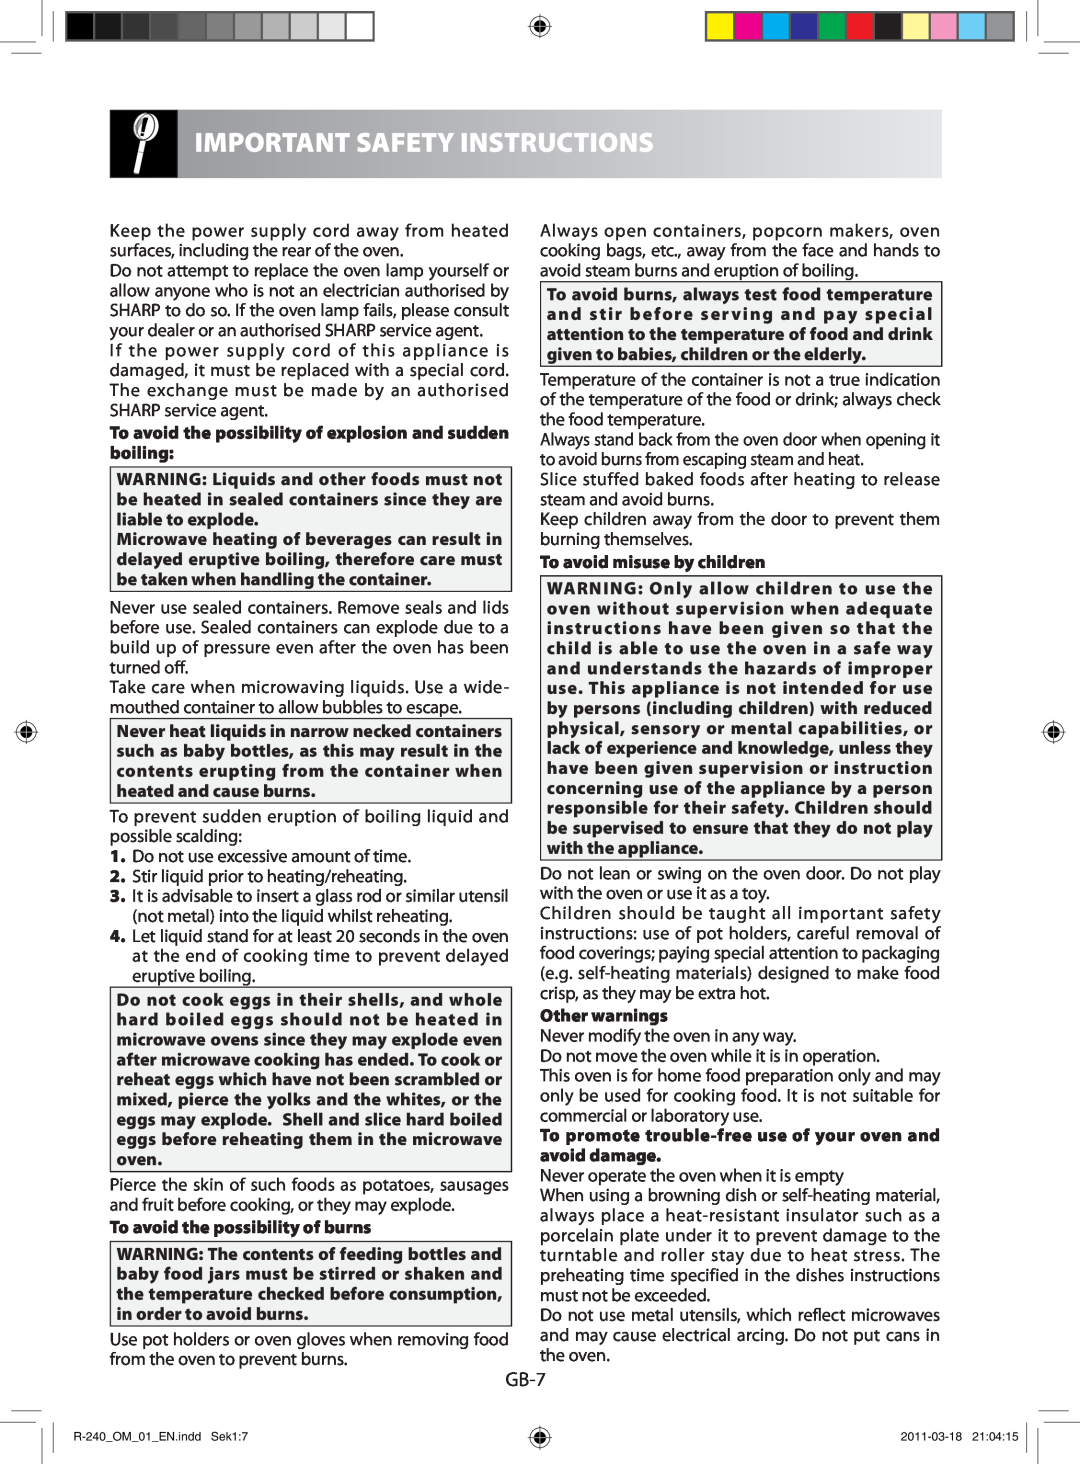 Sharp R-240 manual Important Safety Instructions, GB-7 